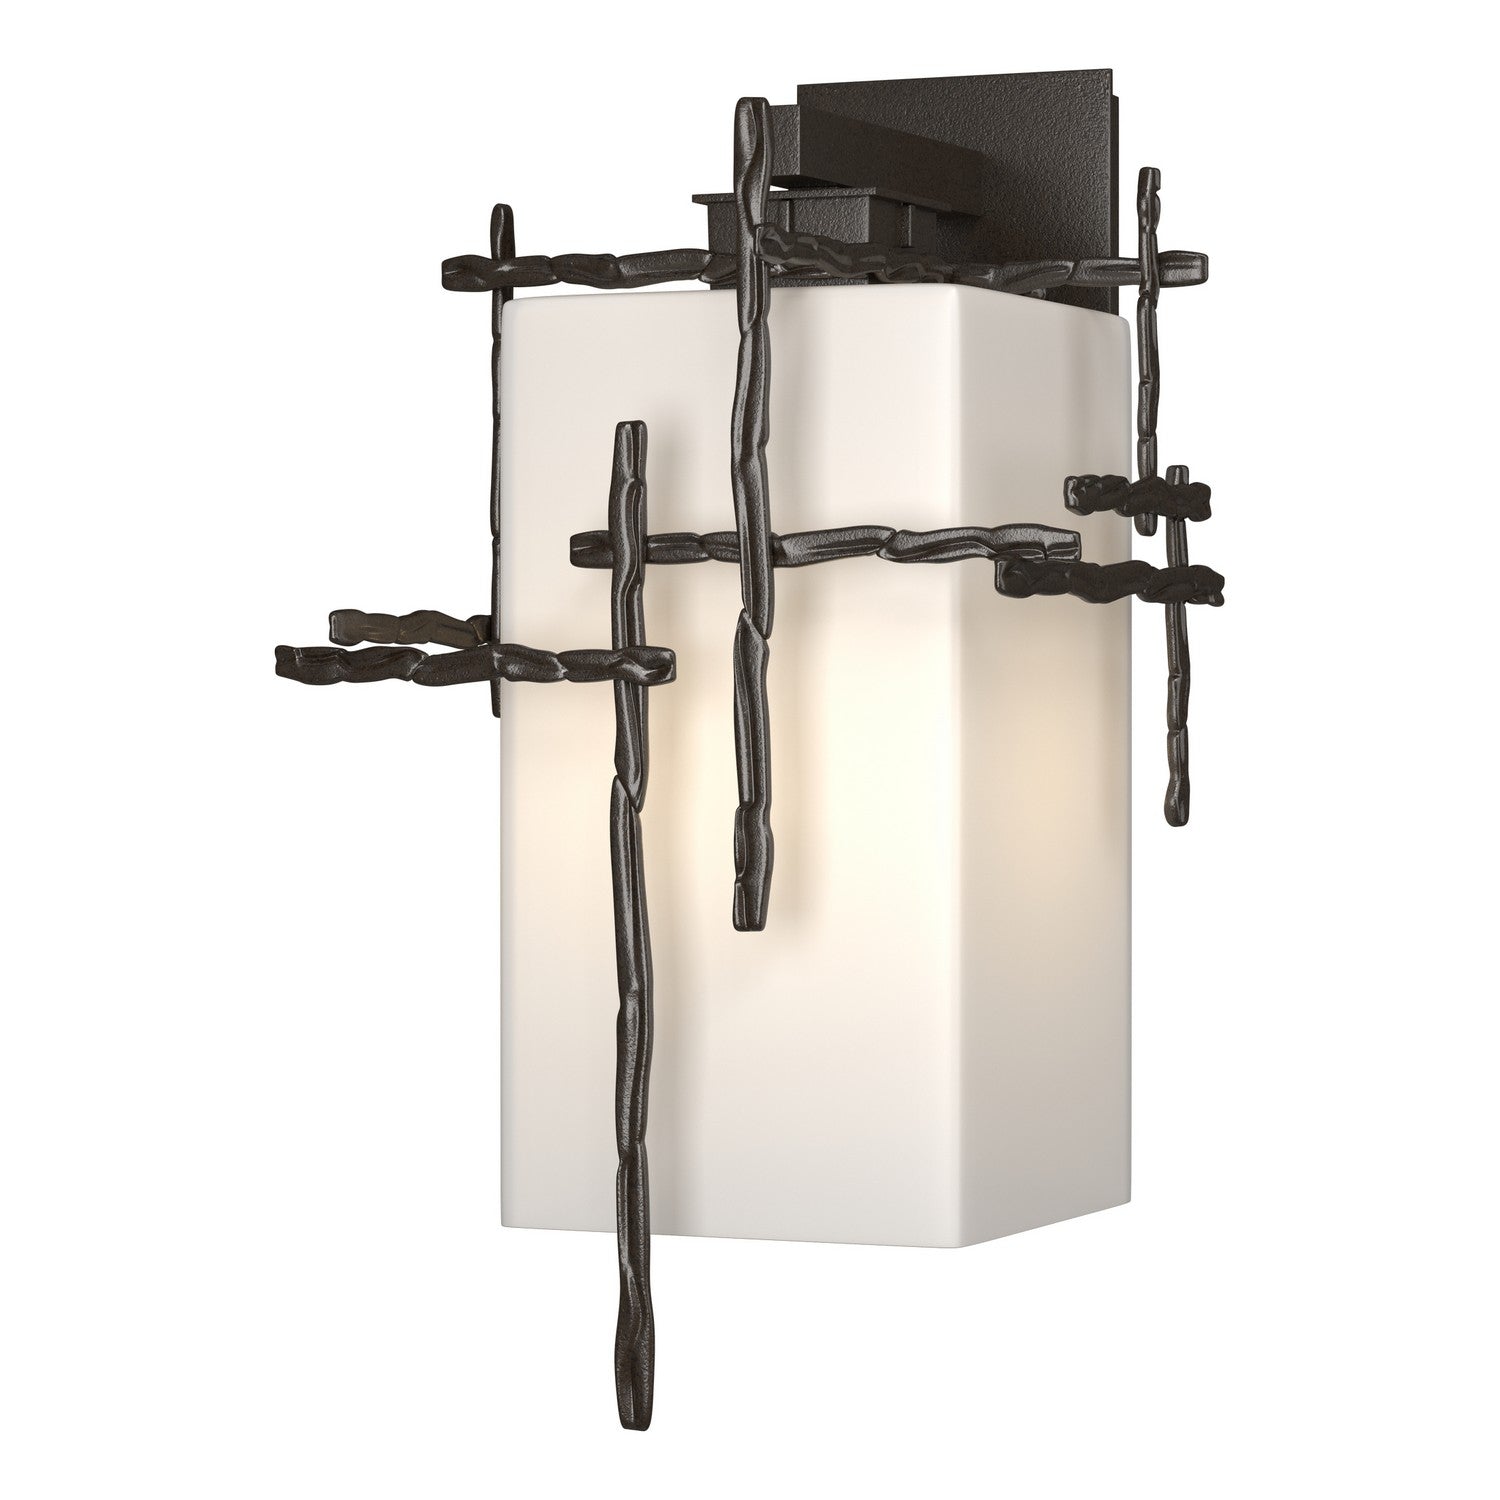 Hubbardton Forge - 302583-SKT-14-GG0707 - One Light Outdoor Wall Sconce - Tura - Coastal Oil Rubbed Bronze